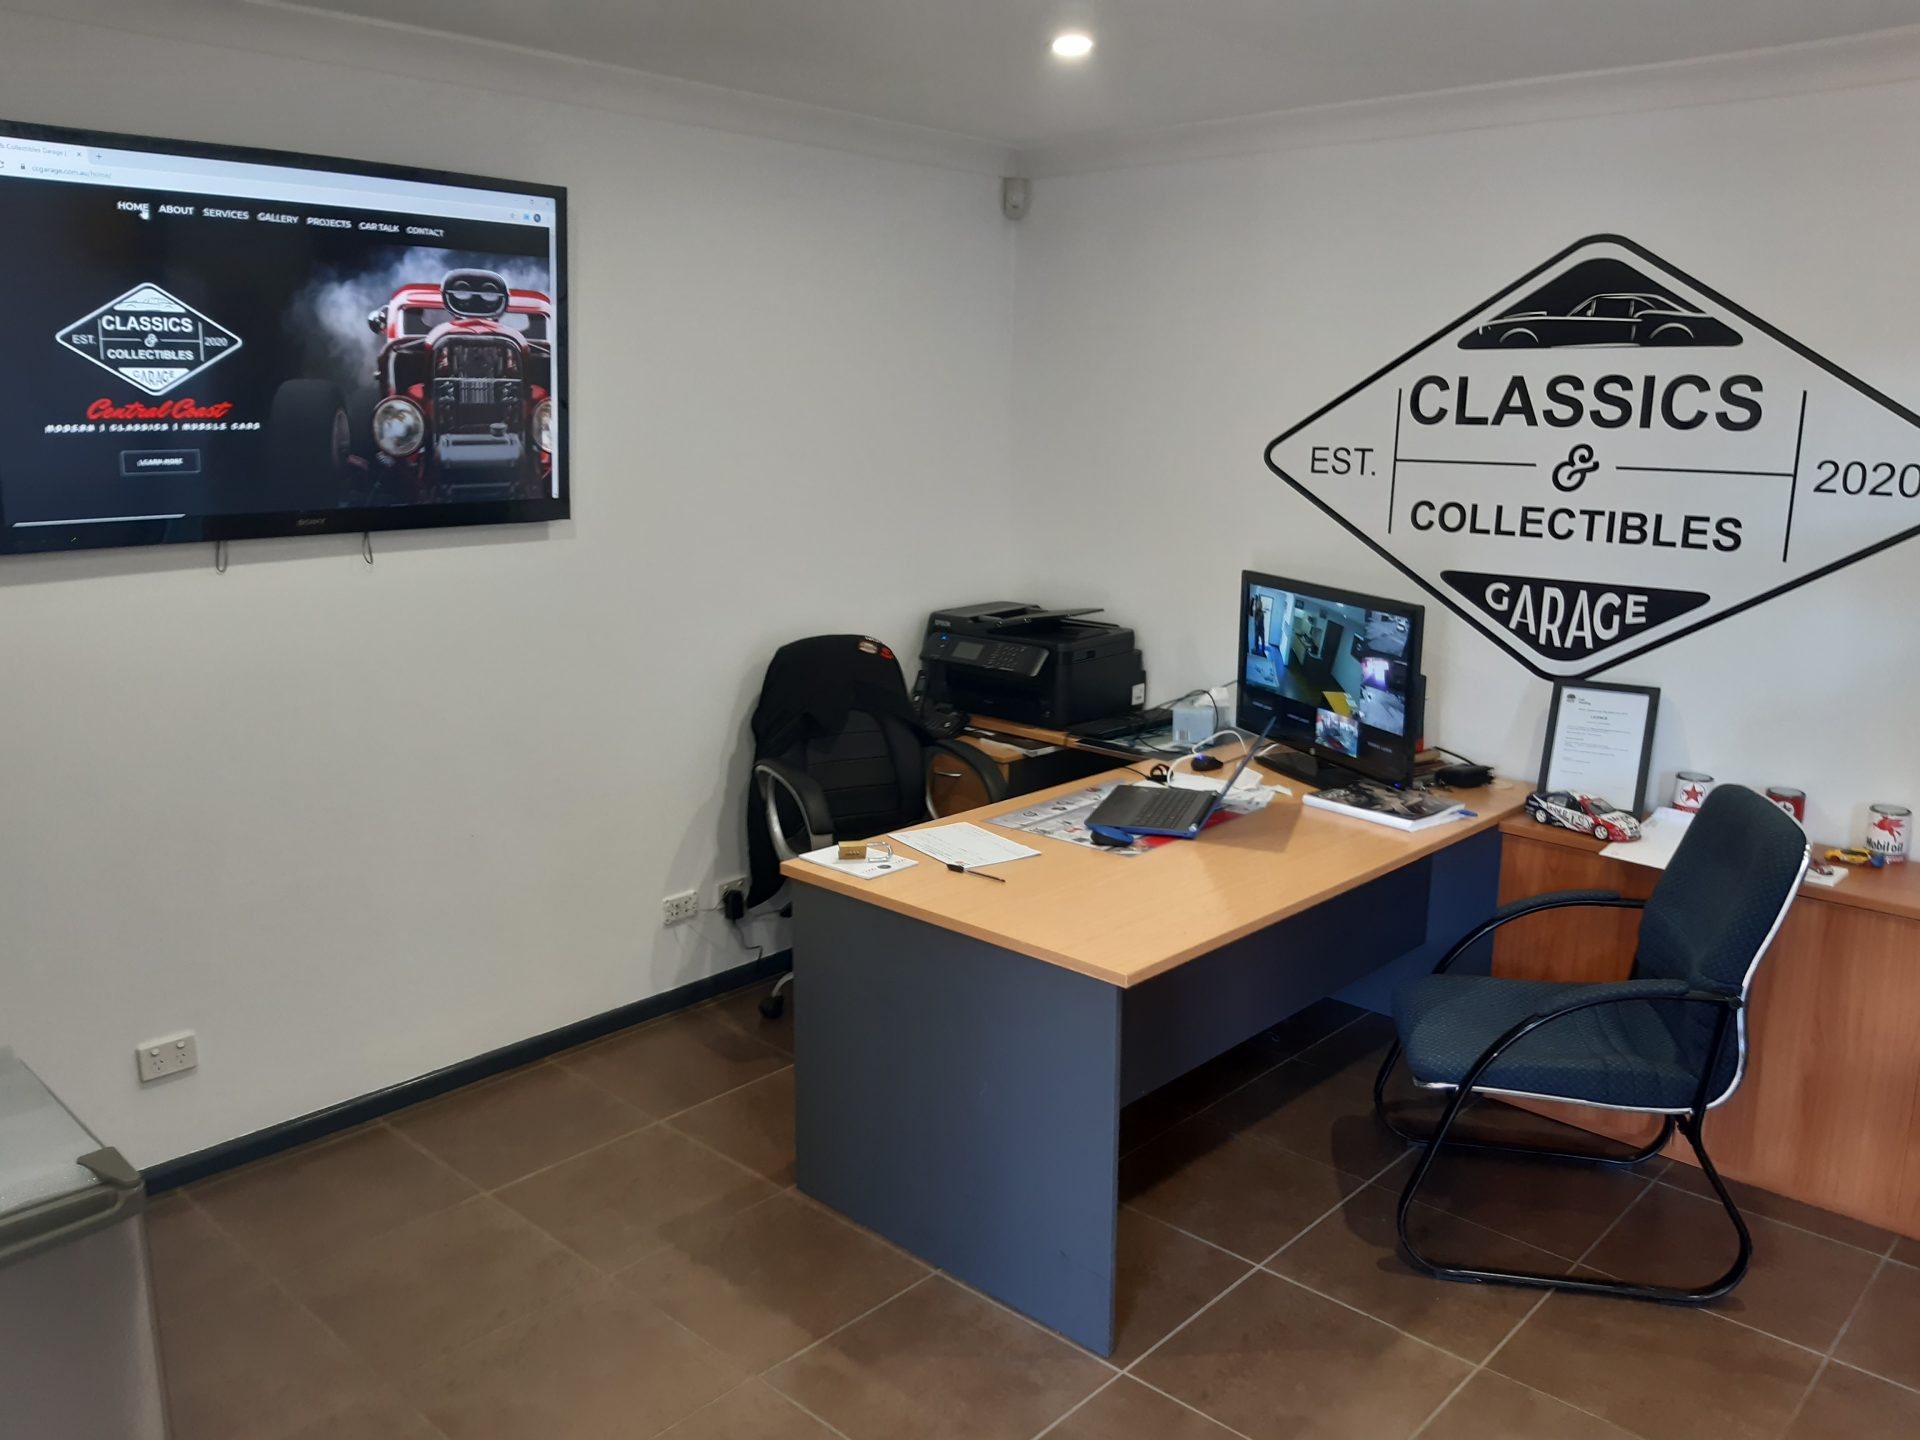 Classics & Collectibles Garage Office